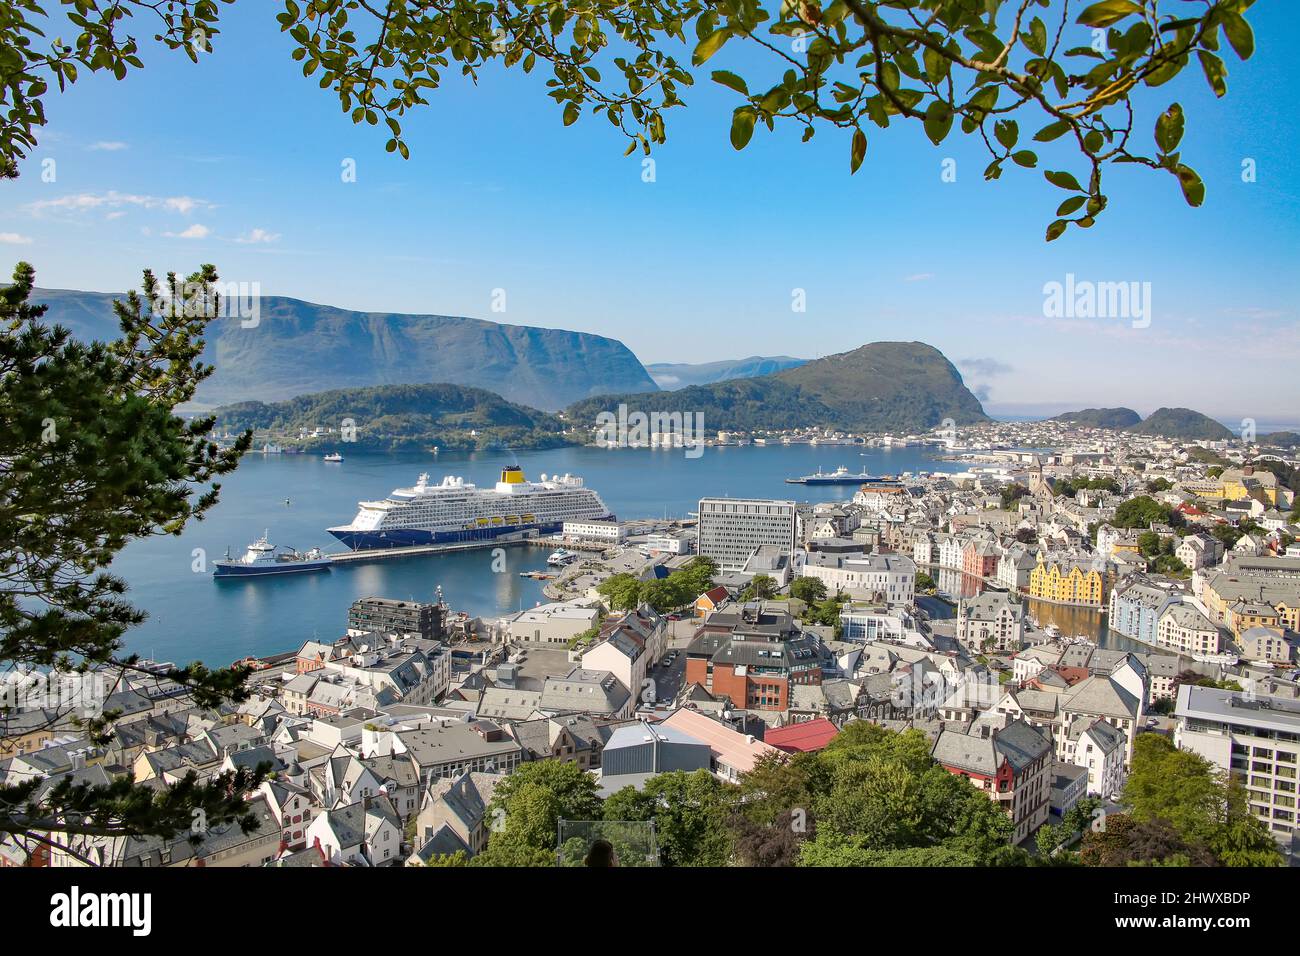 Alesund panoramic view of the archipelago, the beautiful town centre, art nouveau architecture and fjords from the viewpoint Aksla, Alesund, Norway. Stock Photo